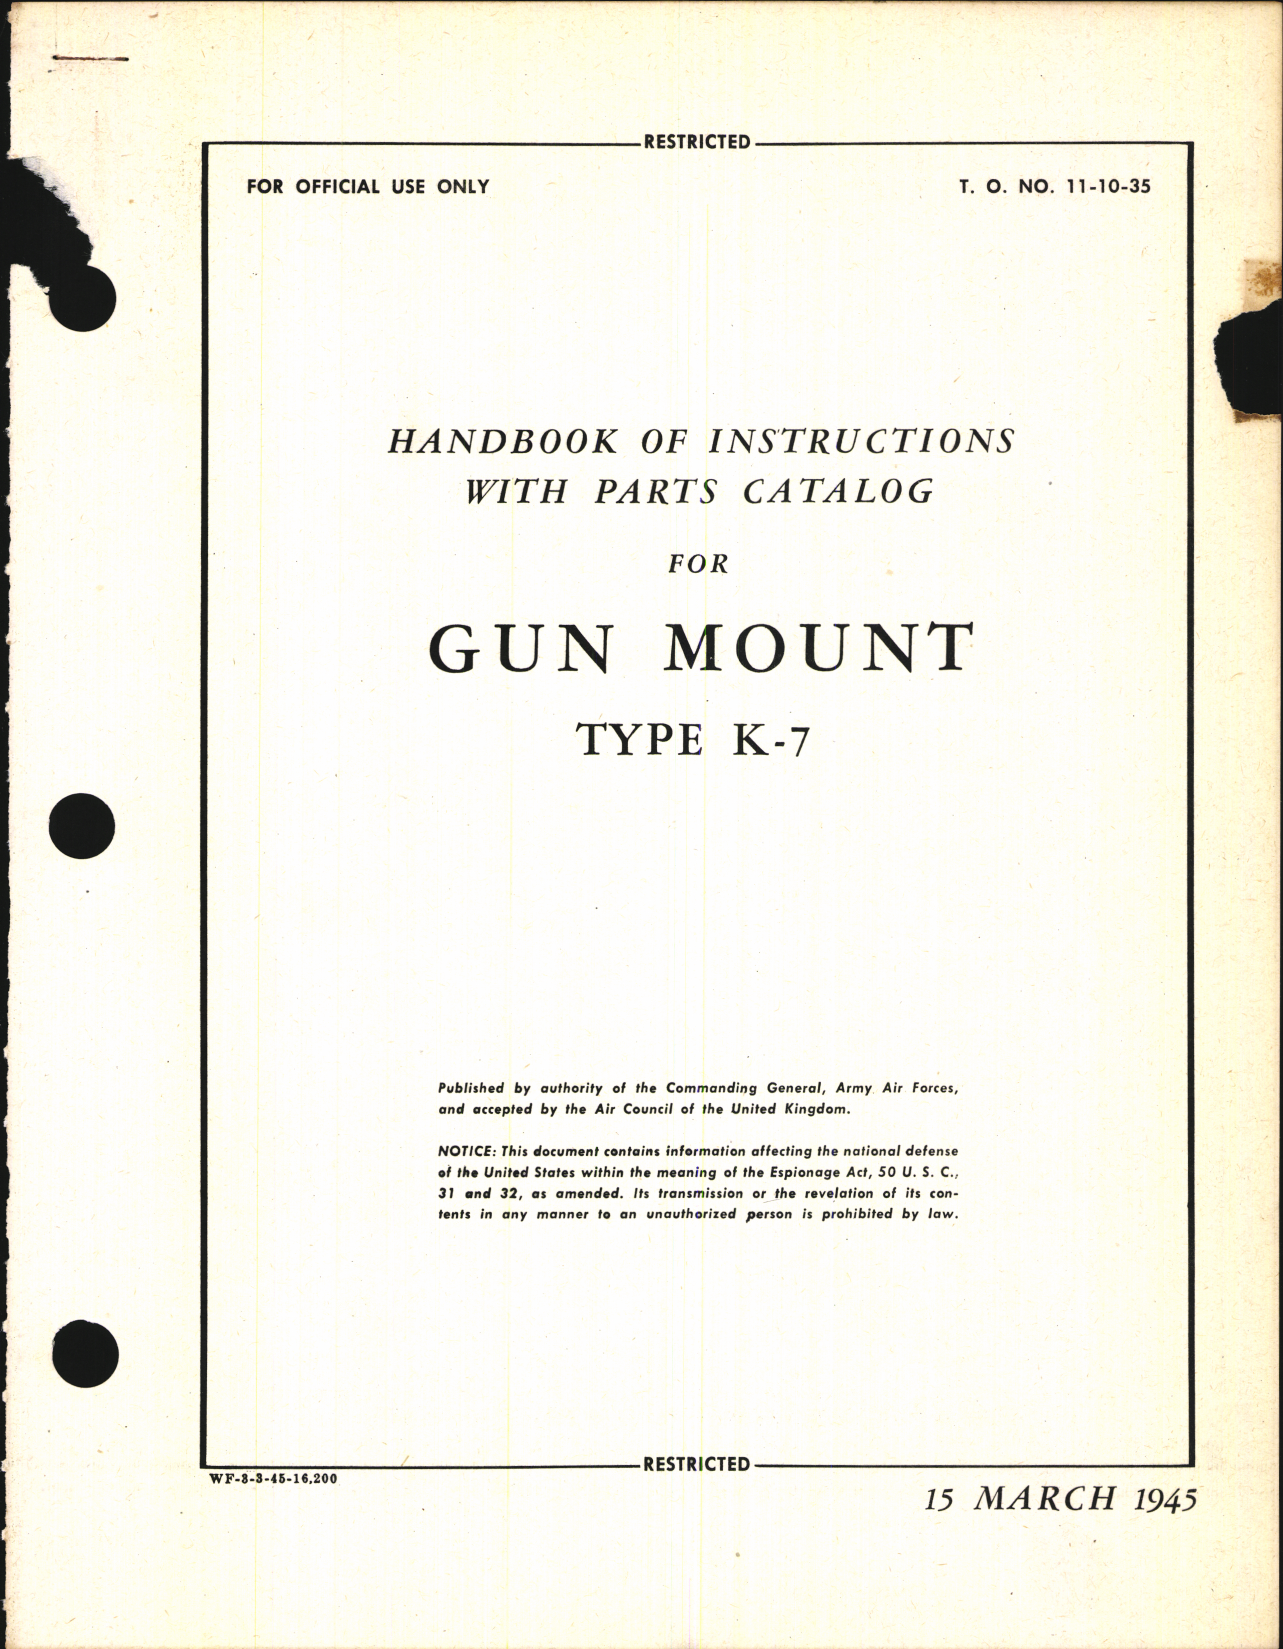 Sample page 1 from AirCorps Library document: Handbook of Instructions with Parts Catalog for Gun Mount Type K-7